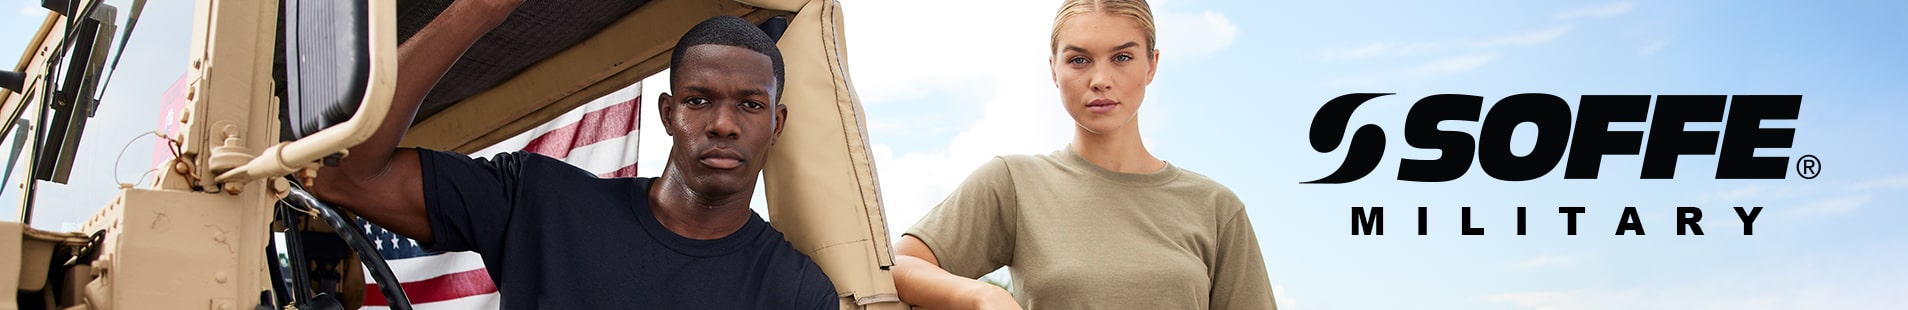 Soffe Military now featuring tees, shorts, and more.